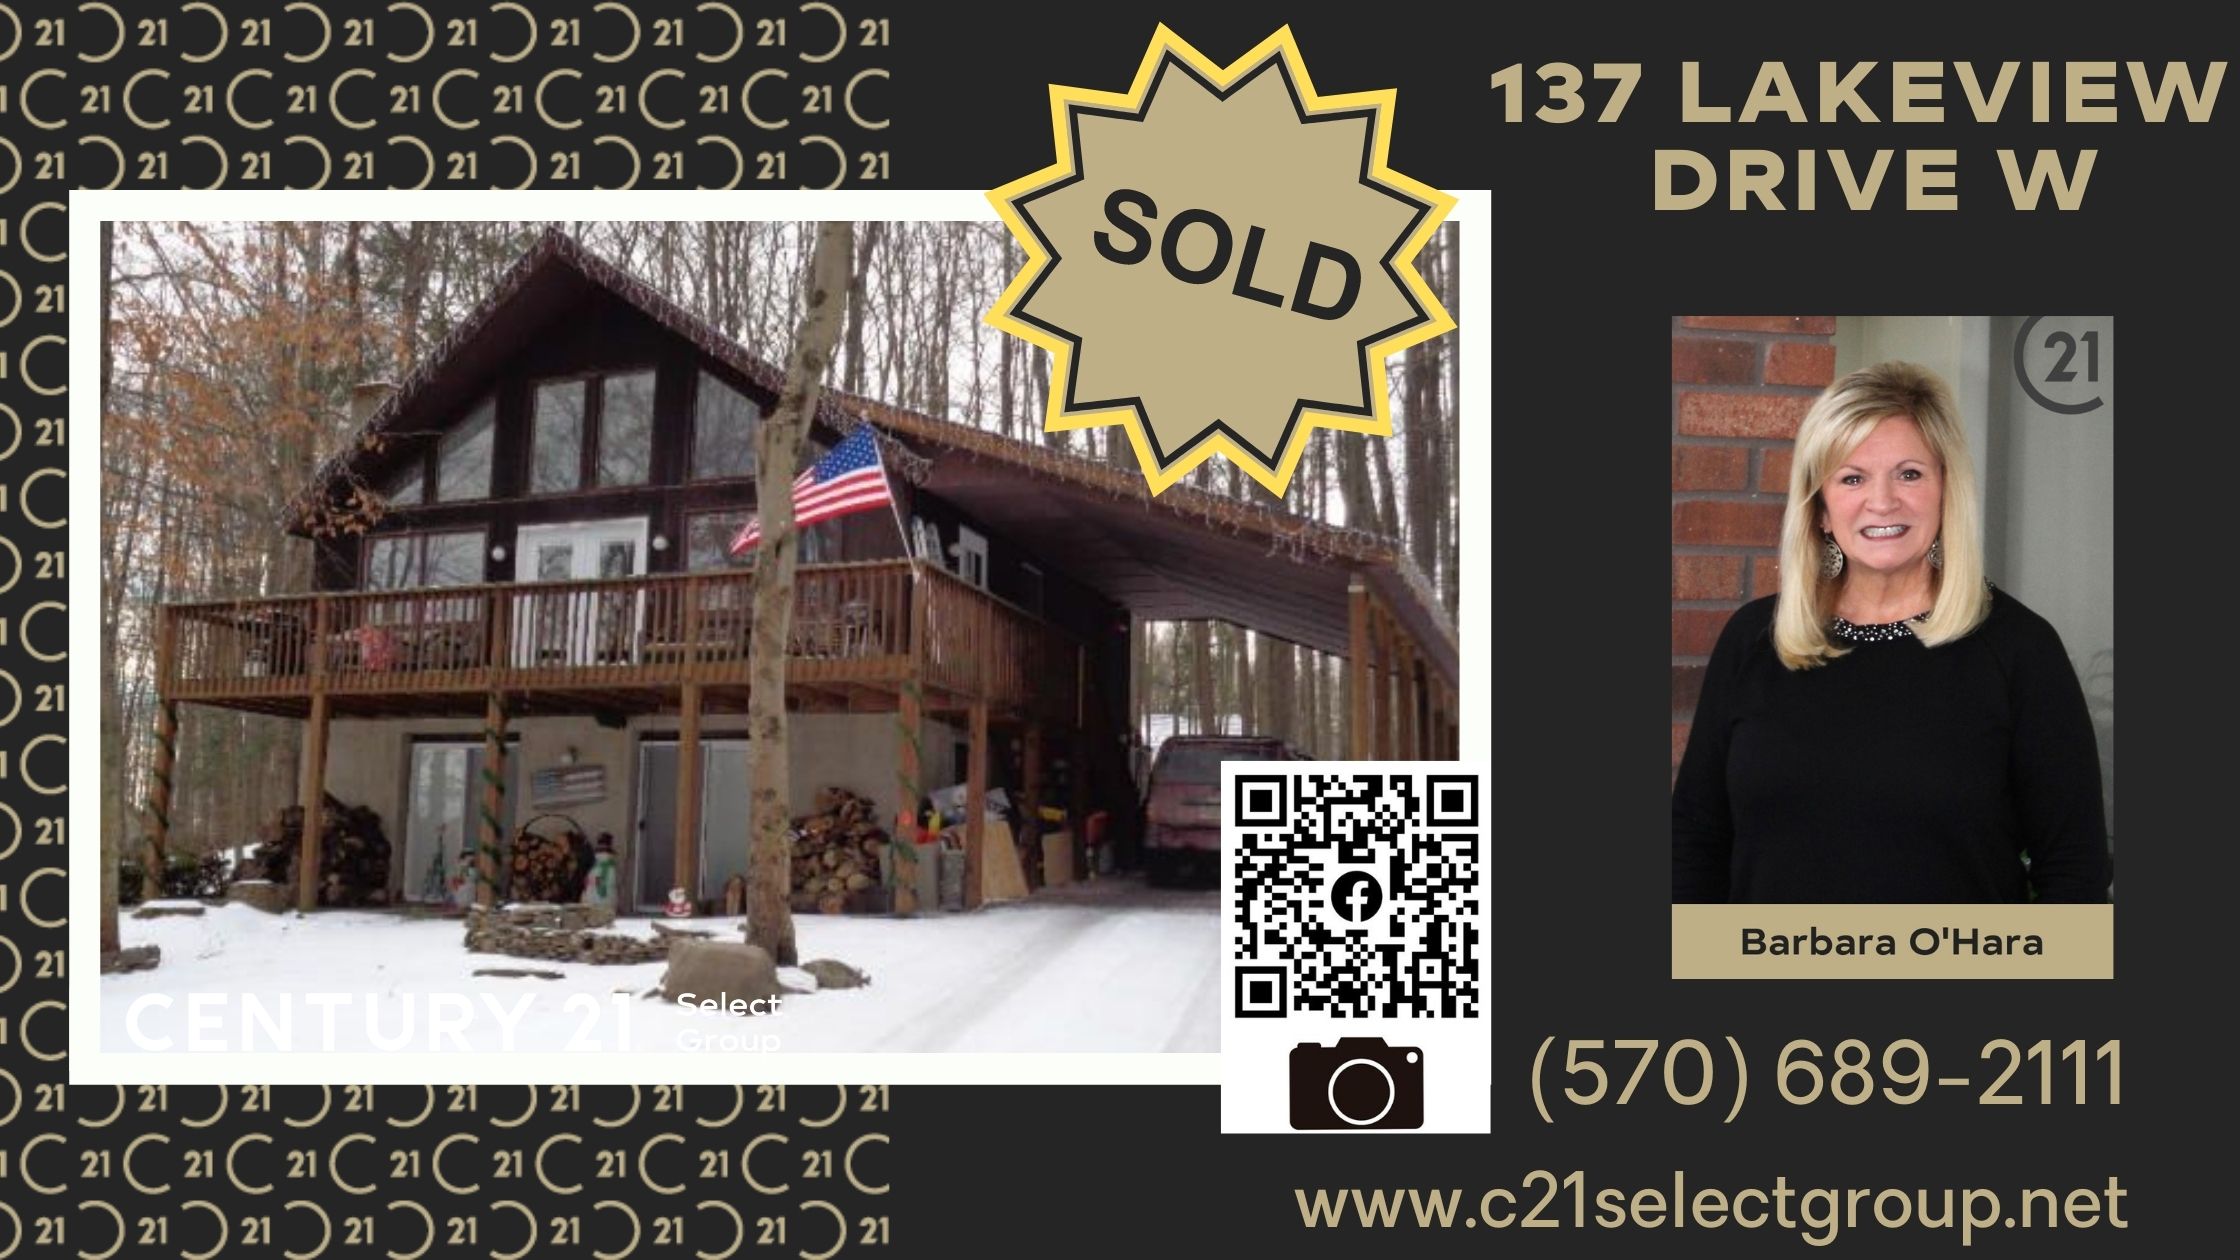 SOLD! 137 Lakeview Drive W: The Hideout